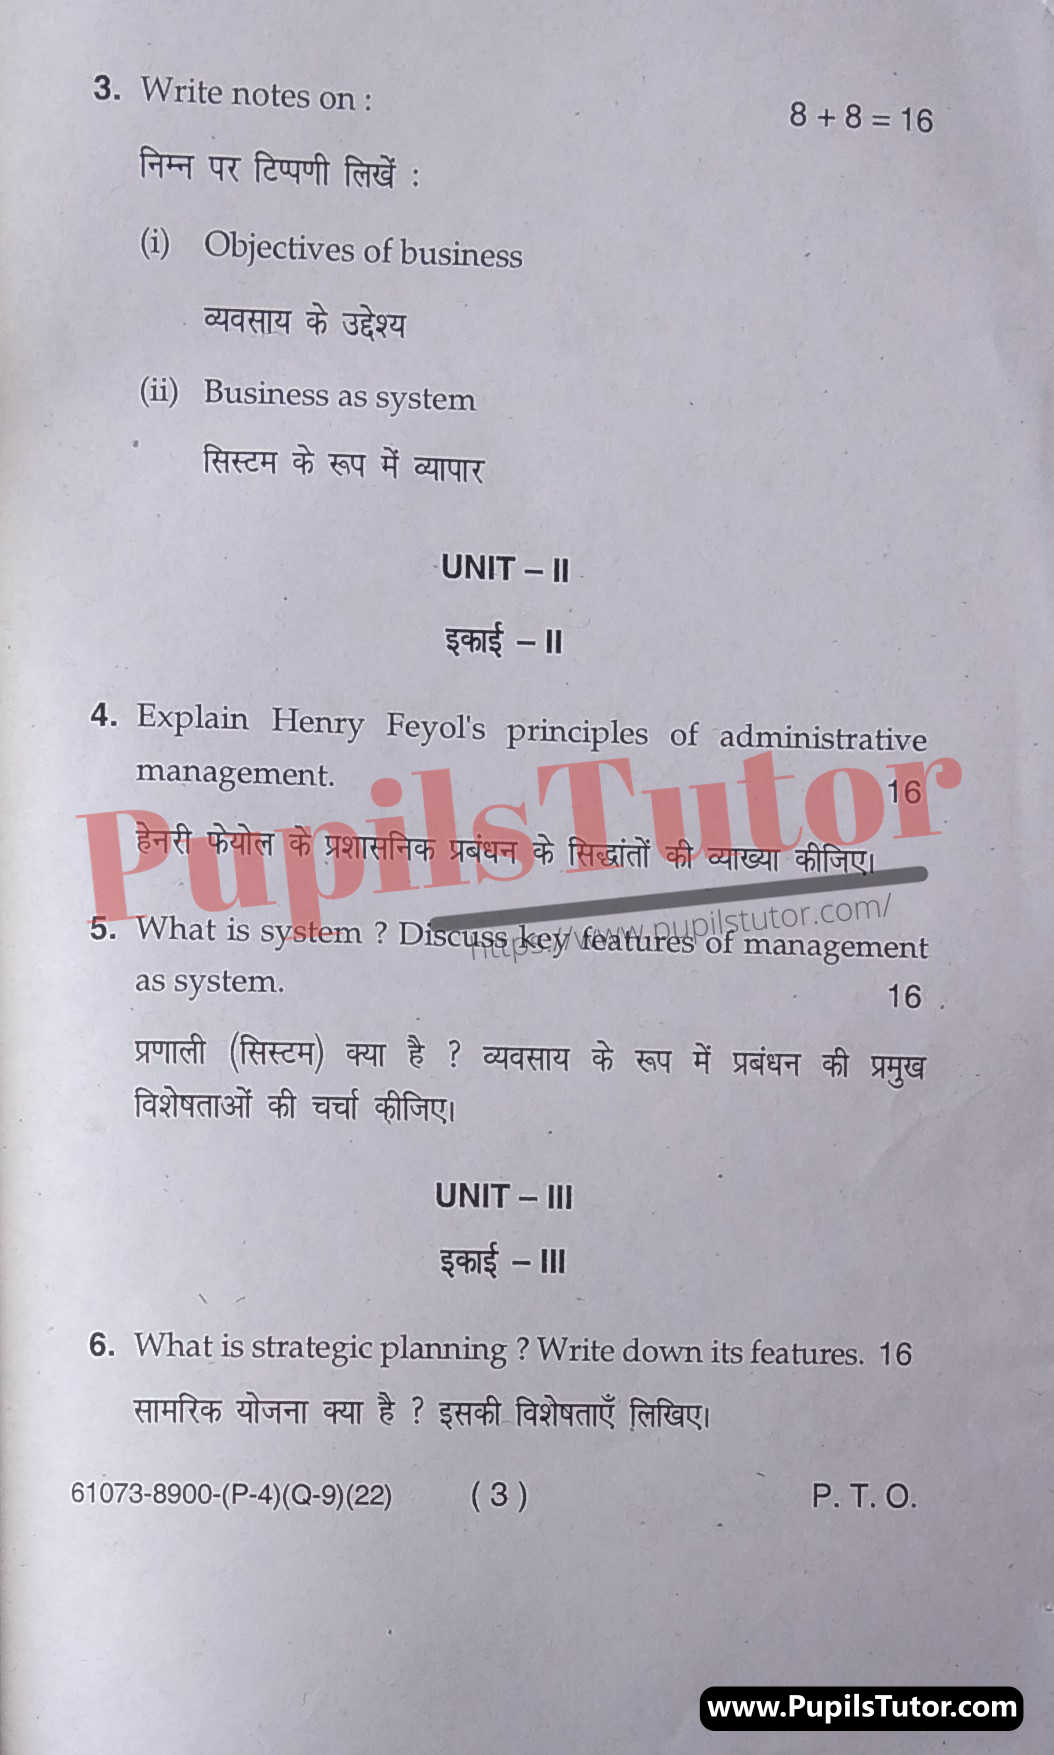 Free Download PDF Of M.D. University B.Com. First Semester Latest Question Paper For Business Management Subject (Page 3) - https://www.pupilstutor.com